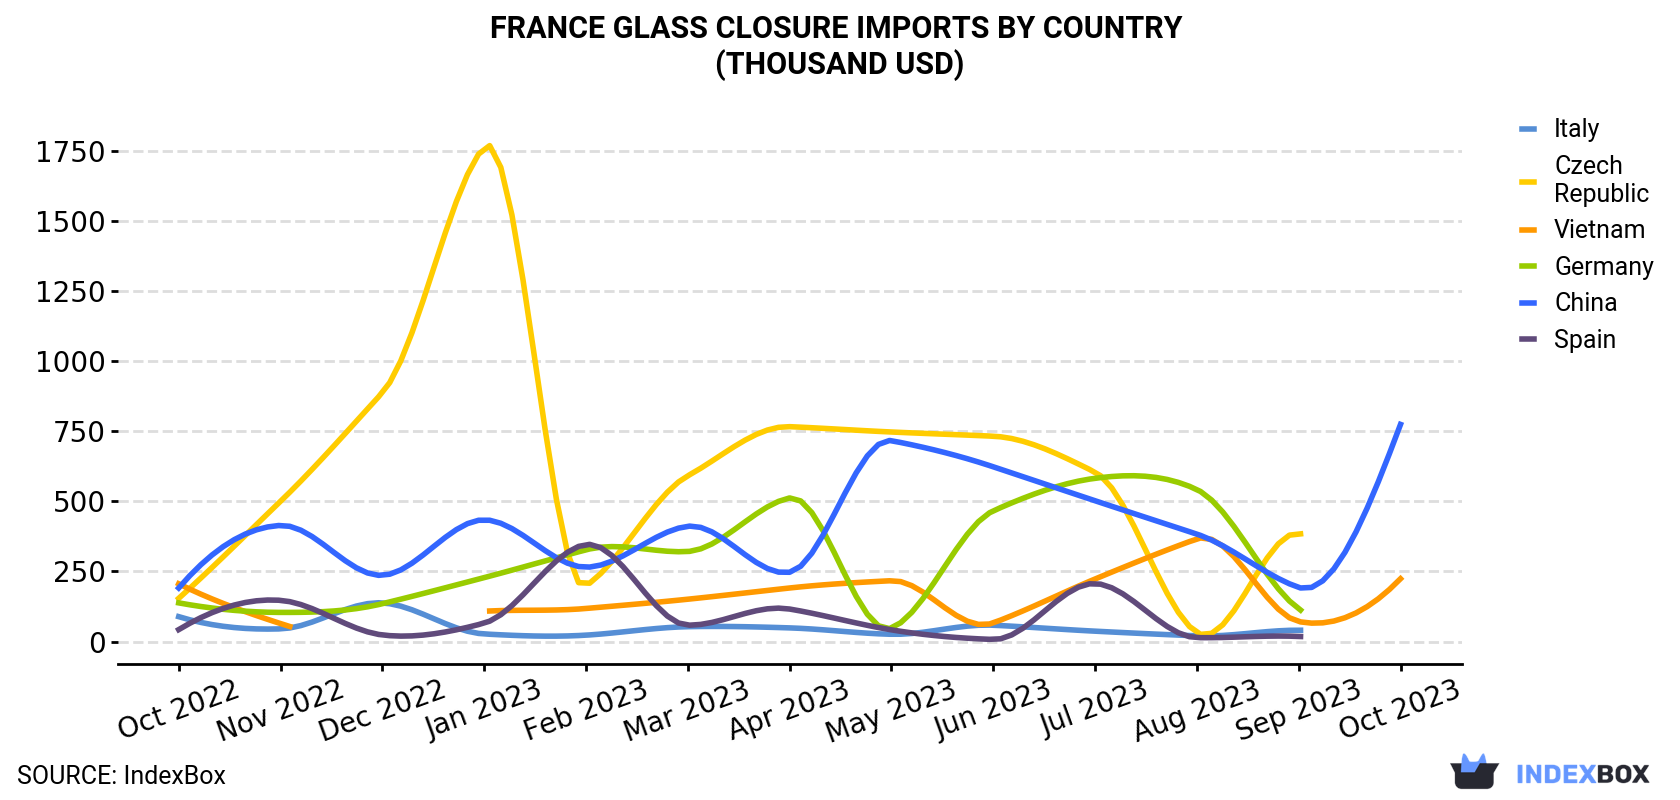 France Glass Closure Imports By Country (Thousand USD)